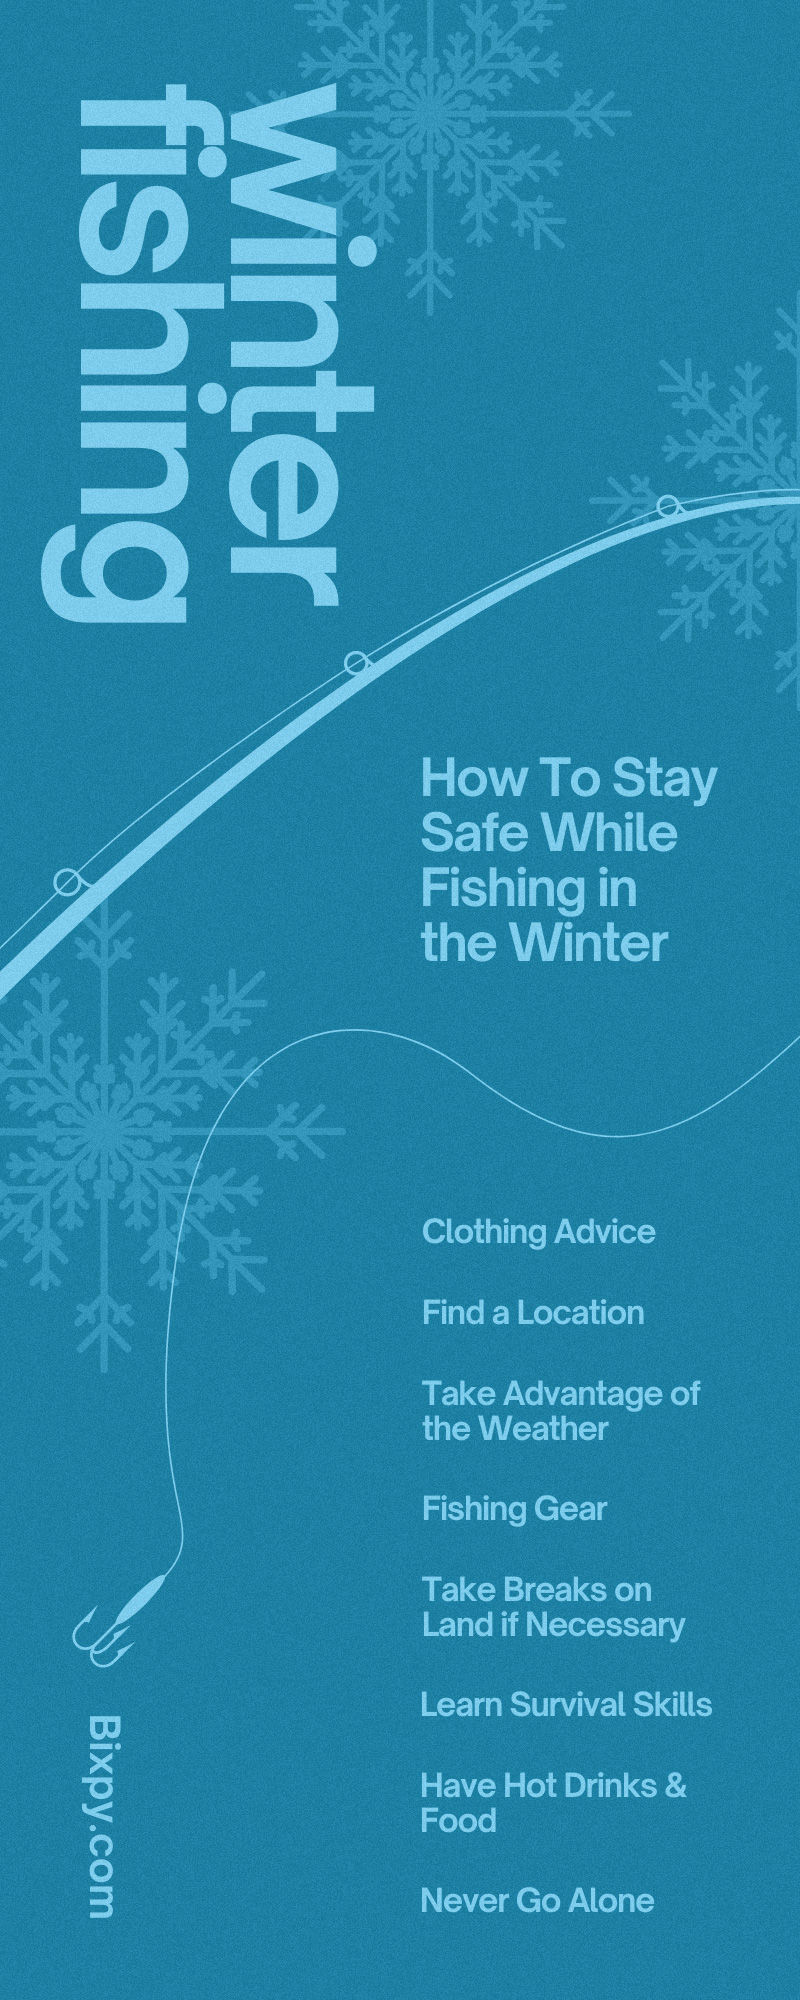 How To Stay Safe While Fishing in the Winter